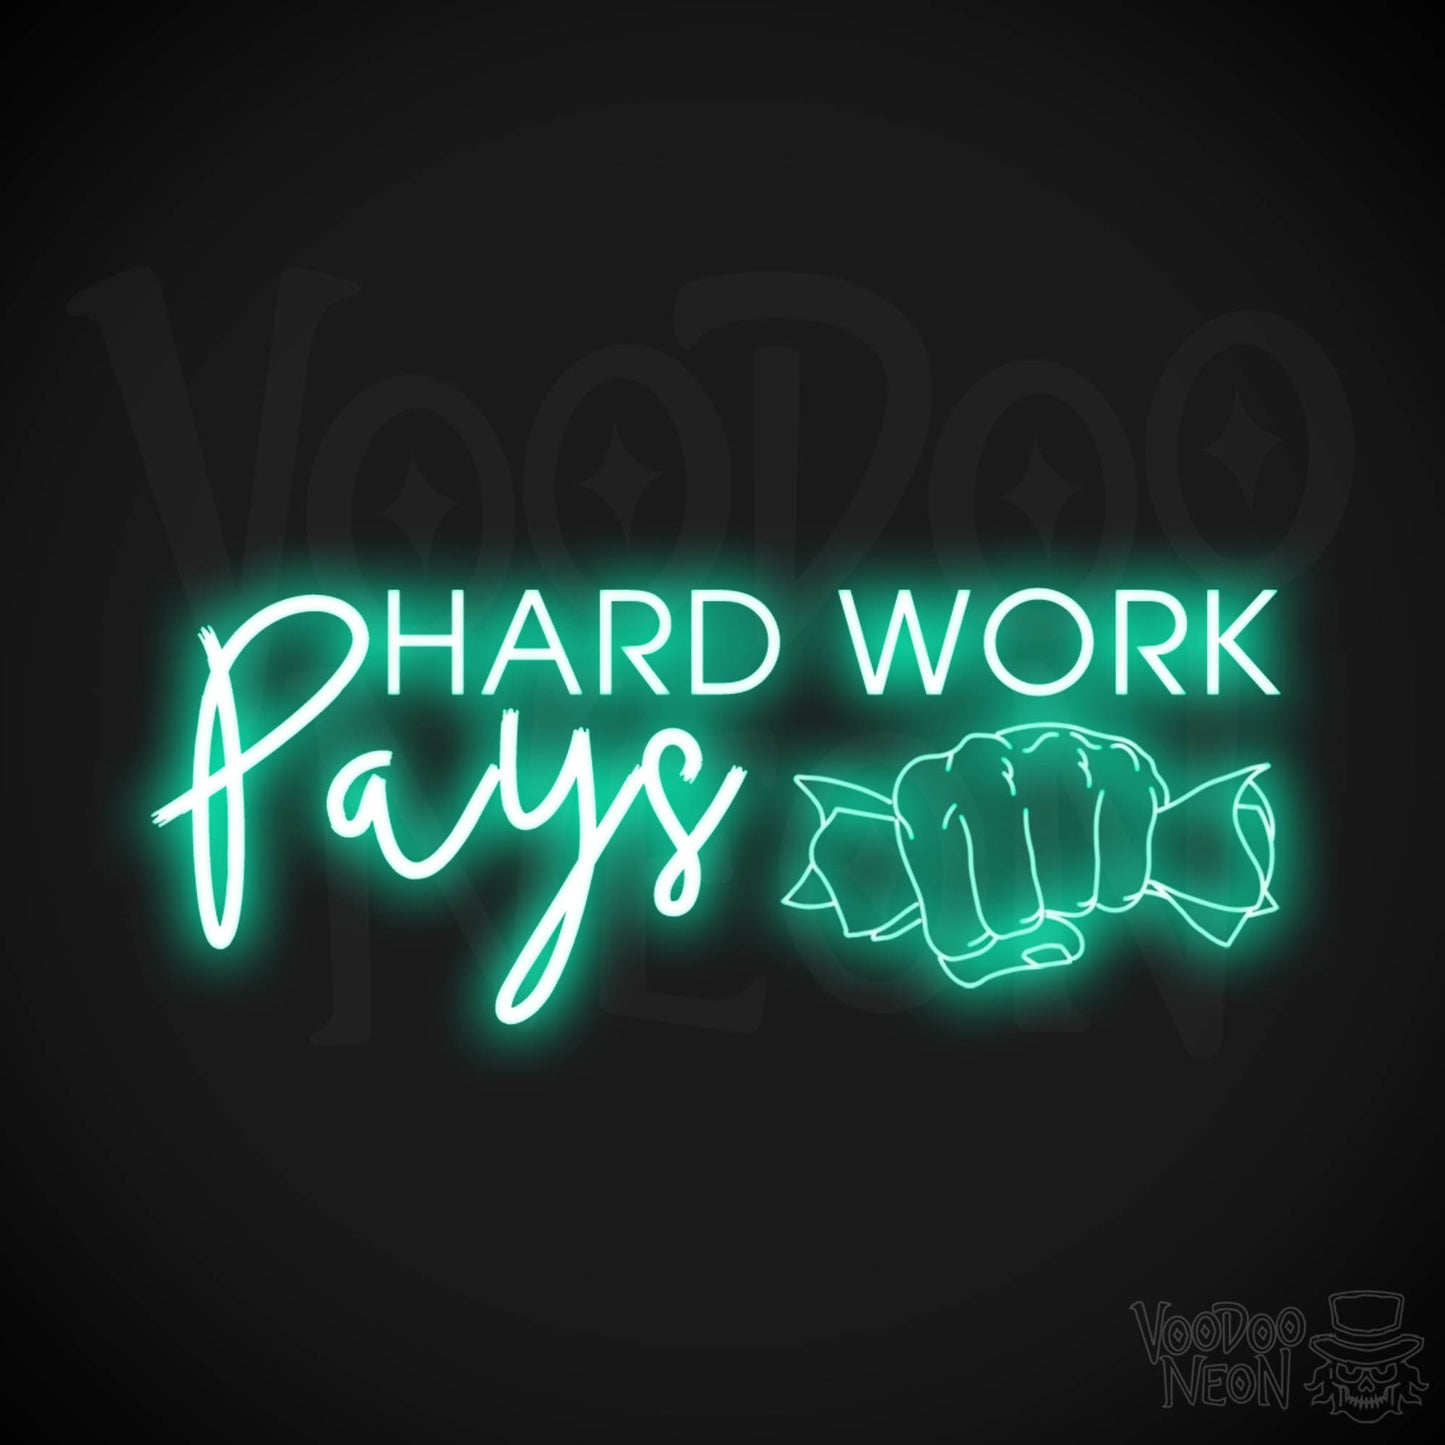 Hard Work Pays Neon Sign - LED Neon Wall Art - Color Light Green